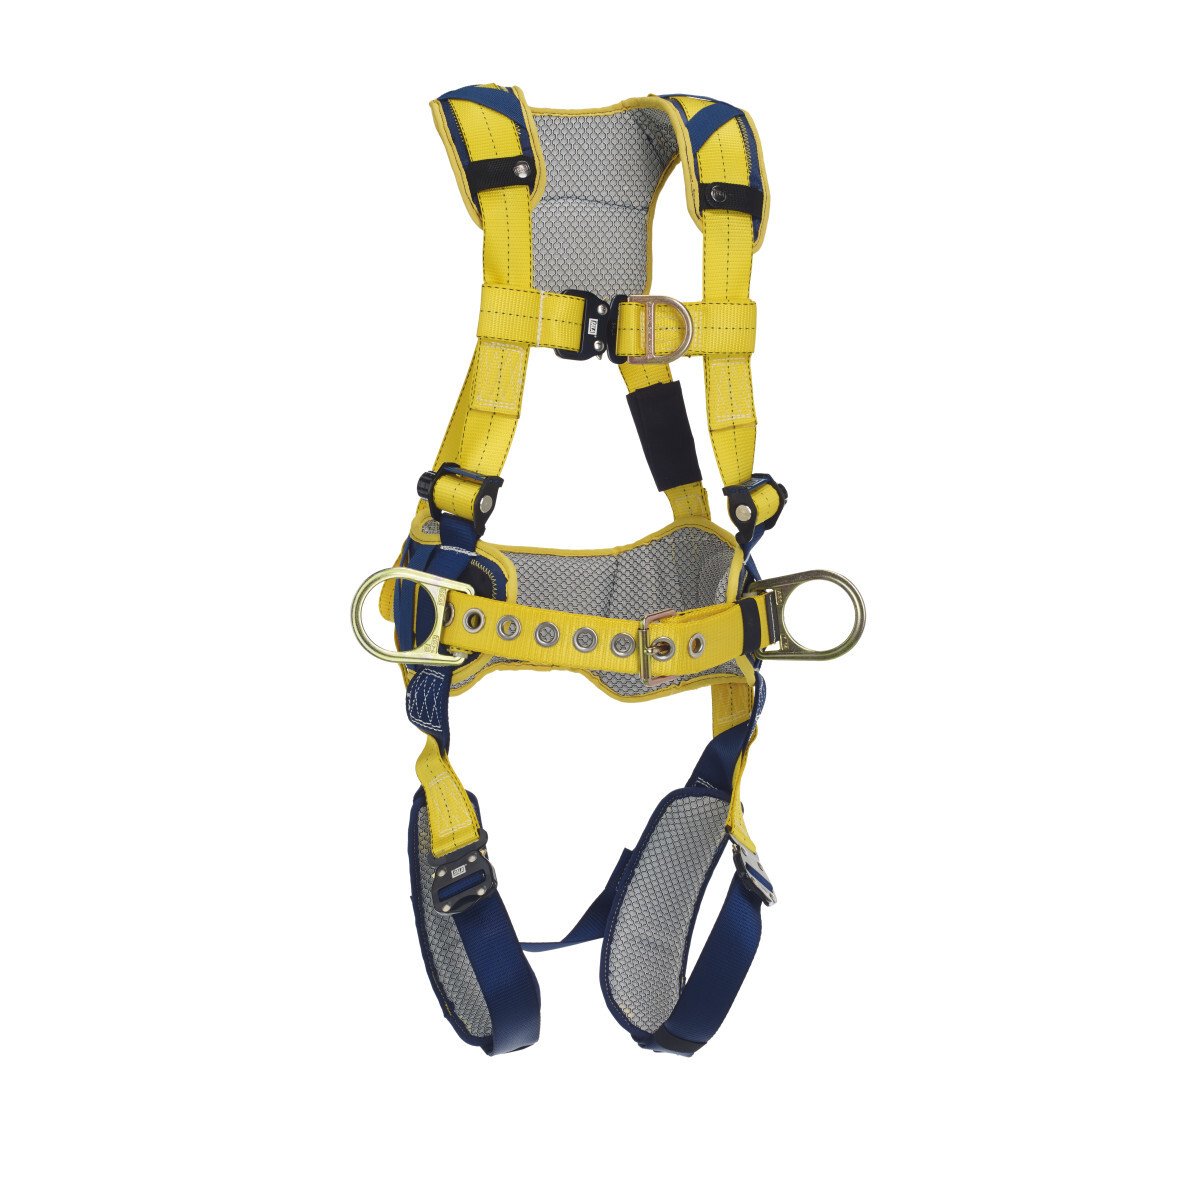 3M™ DBI-SALA® X-Large Delta™ Construction Style Positioning/Climbing Harness With Back, Front And Side D-rings, Belt With Pad, Q